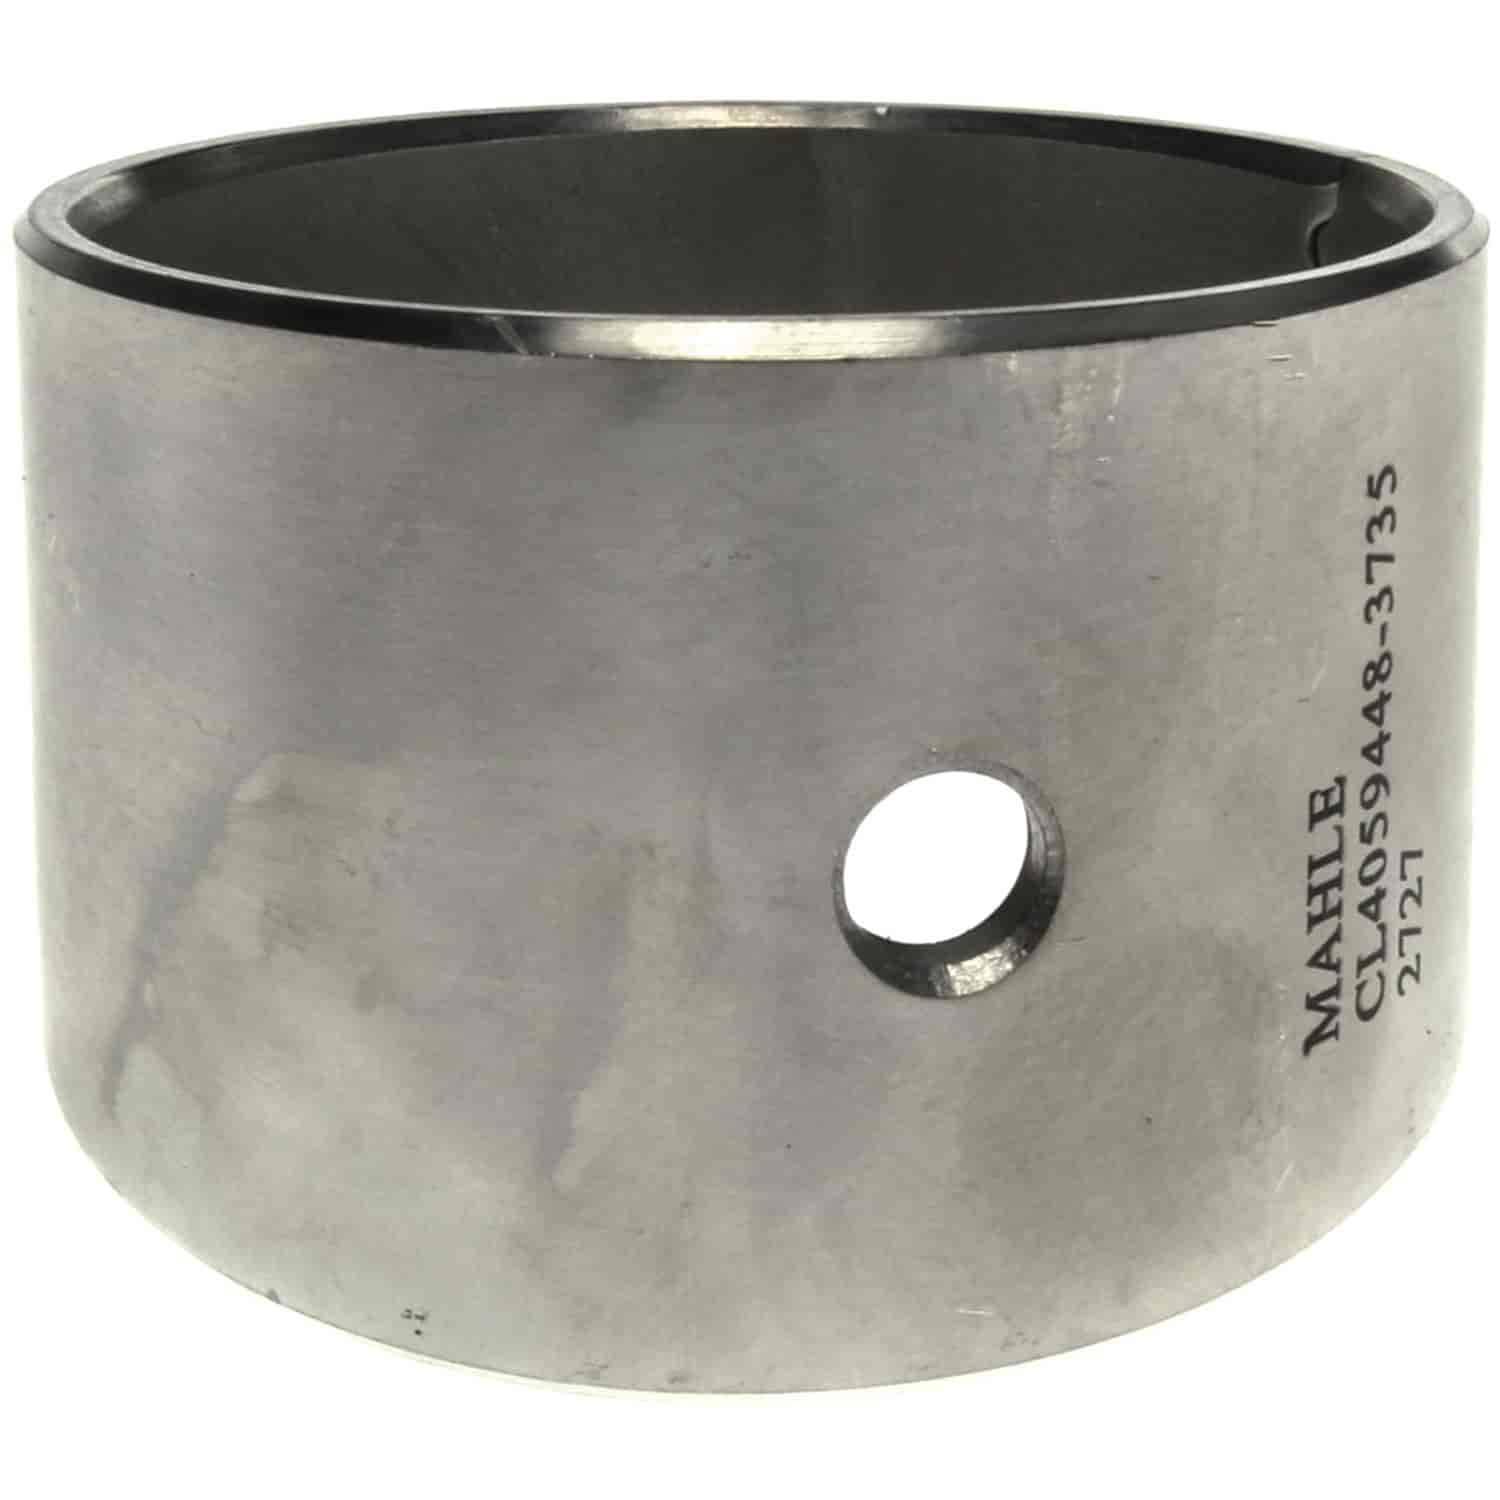 Piston Pin Bushing Cum. 137mm/5.400 Bore ISX OE#4059448 For Drilled Connecting rod